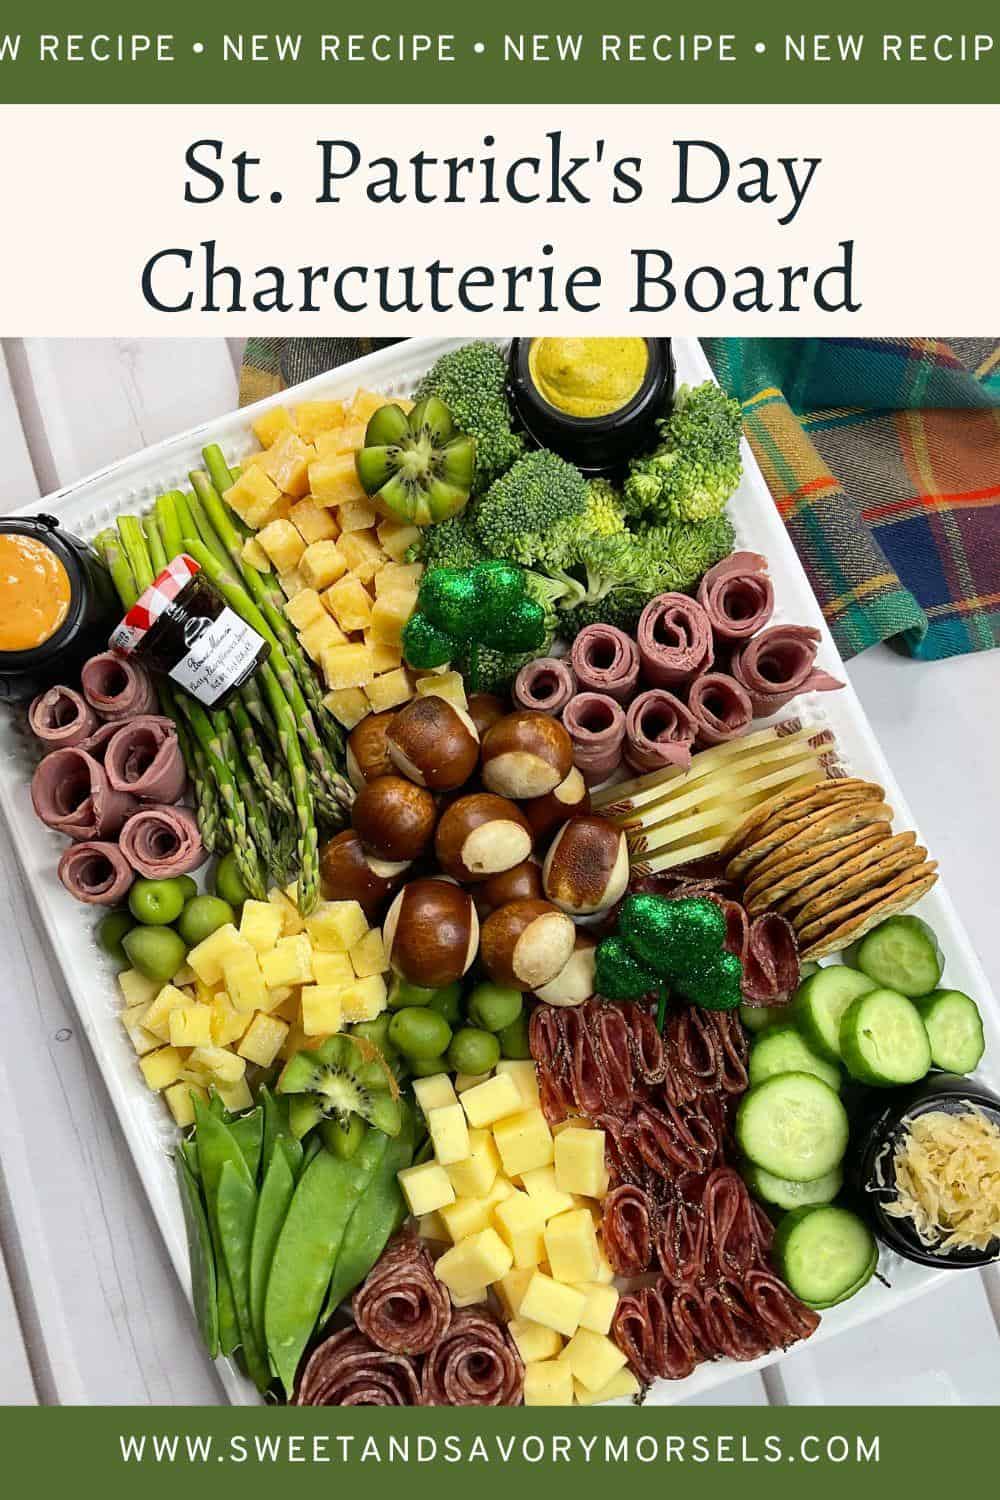 St. Patrick's day charcuterie board - Sweet and Savory Morsels